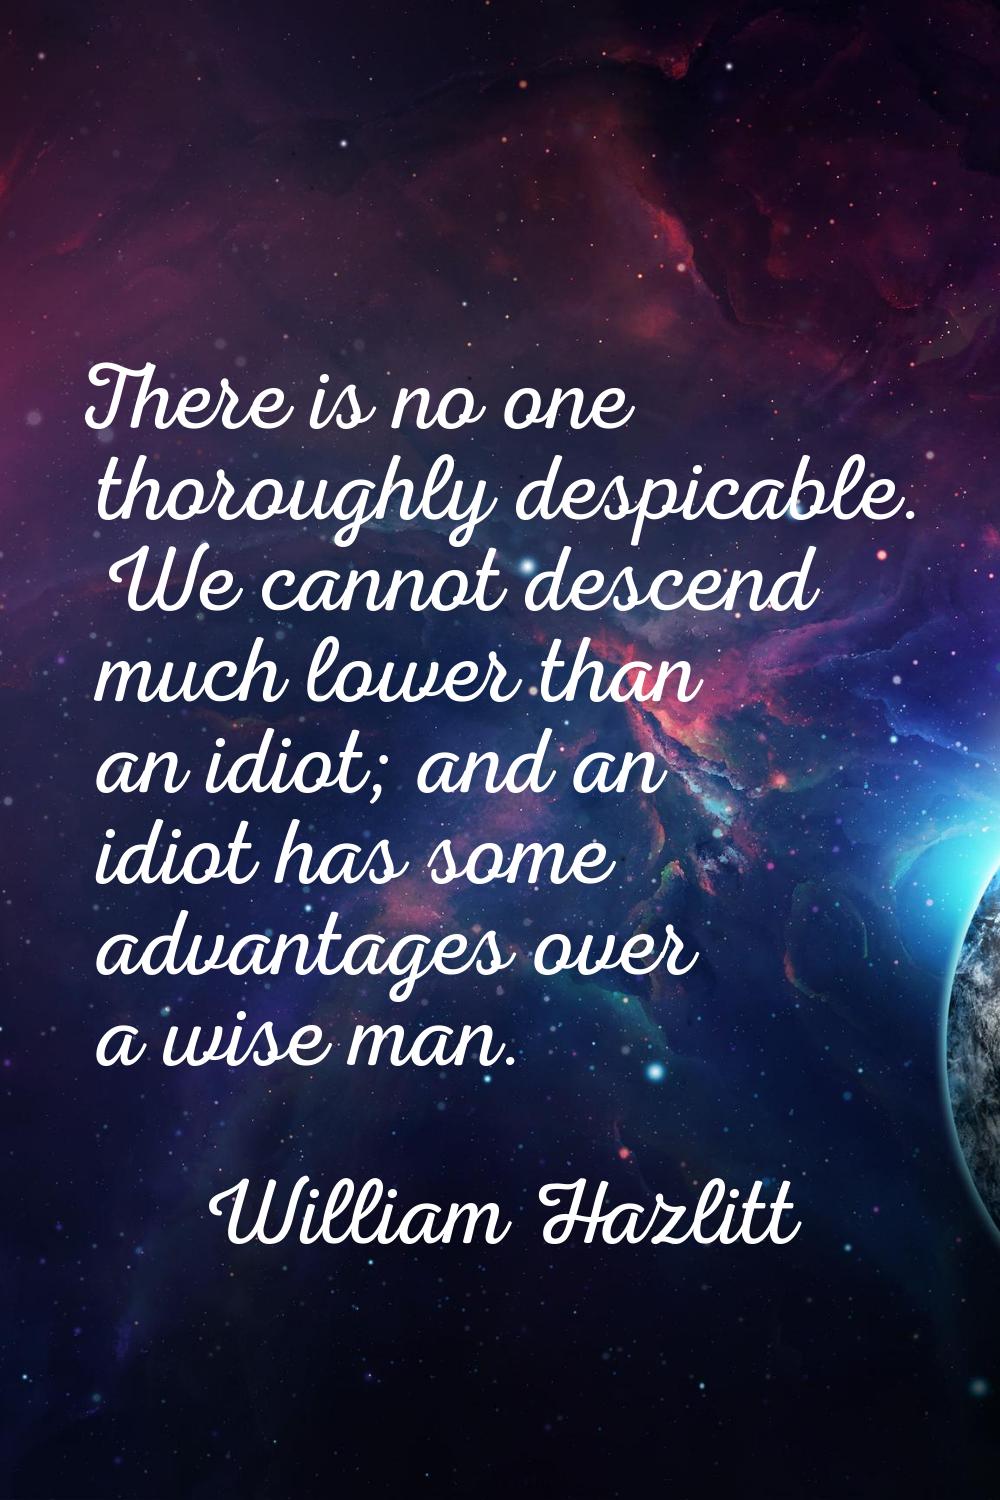 There is no one thoroughly despicable. We cannot descend much lower than an idiot; and an idiot has